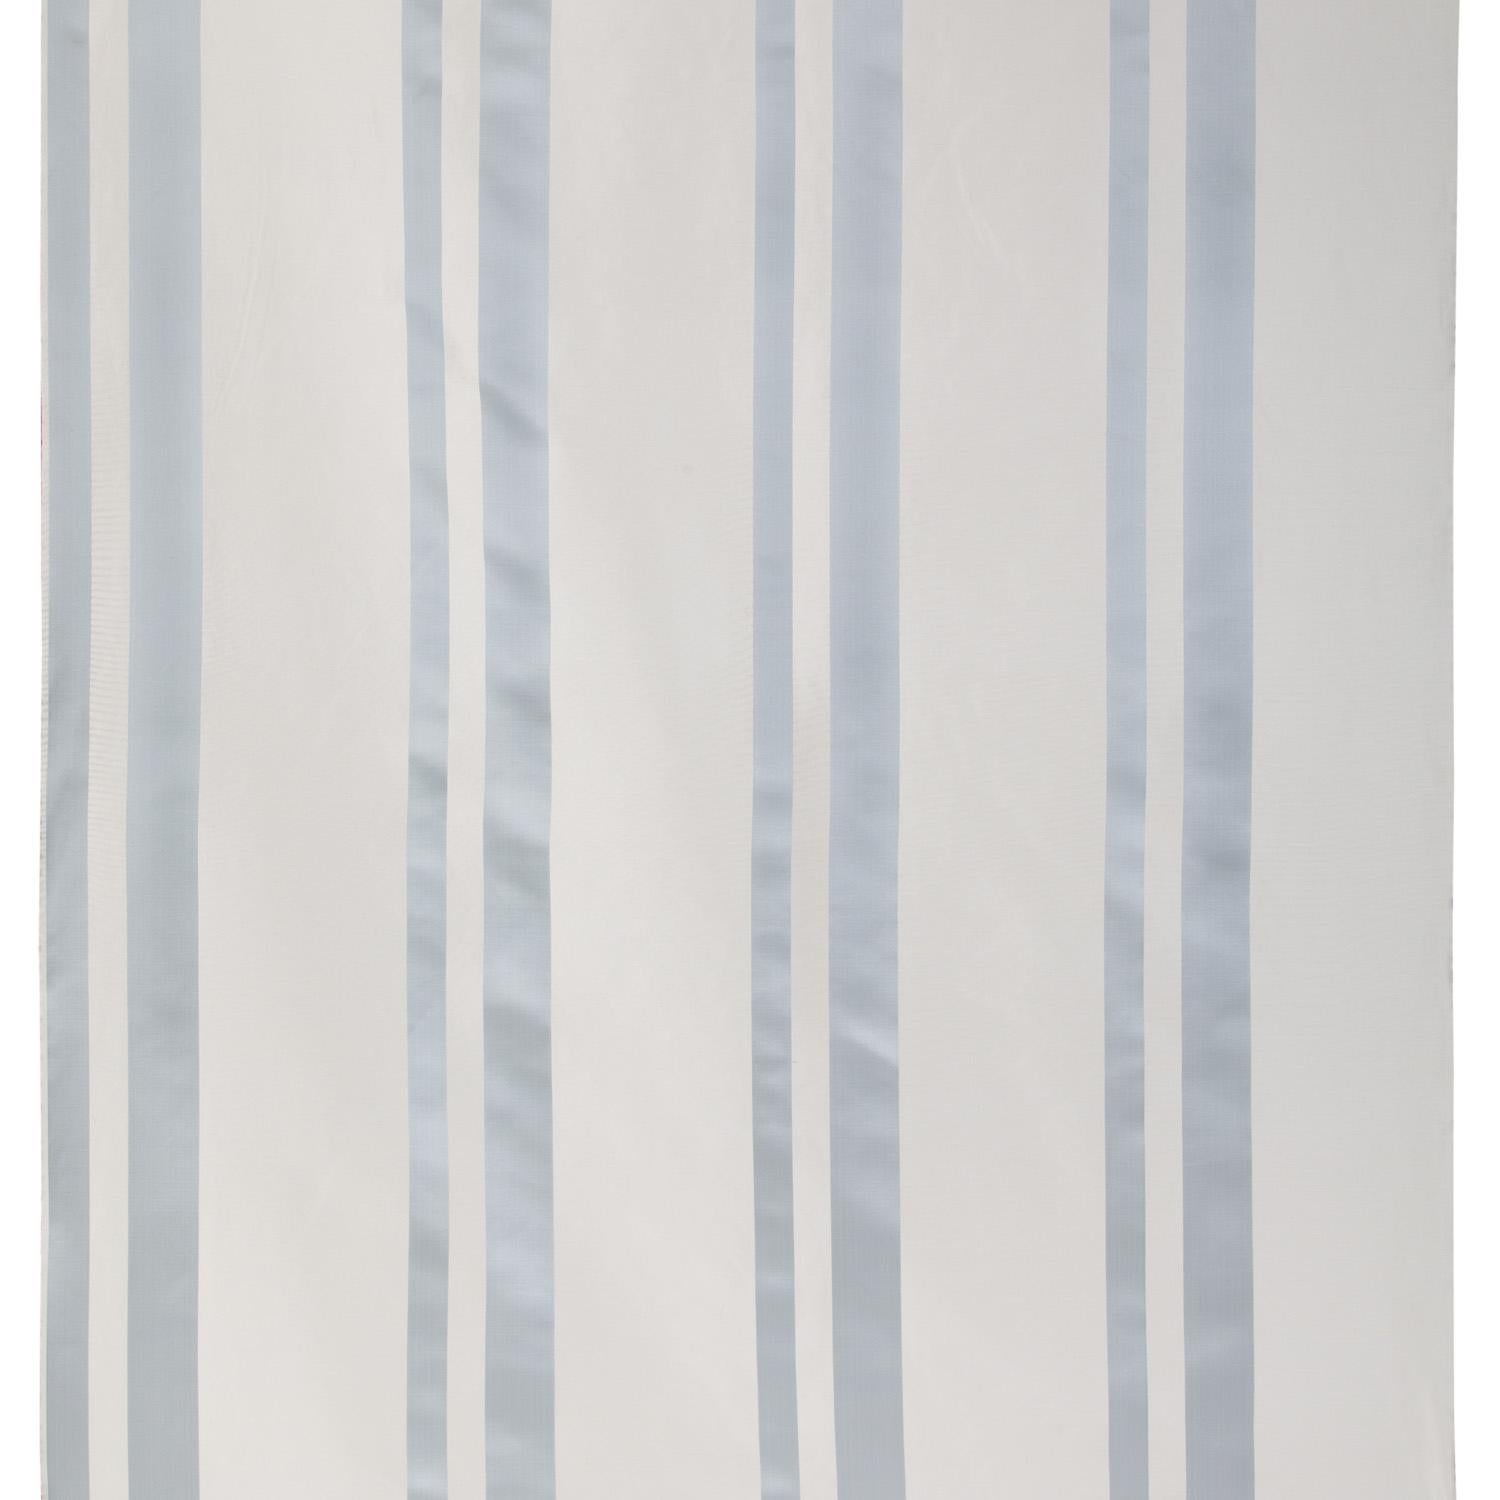 This is a semi mechanical Le Roy fabric with a grosgrain back and satin stripes. It is woven on an original loom from the 1850s. The Le Roy fabric belongs to the Antico Setificio Fiorentino archives. This fabric can be used for light upholstery such